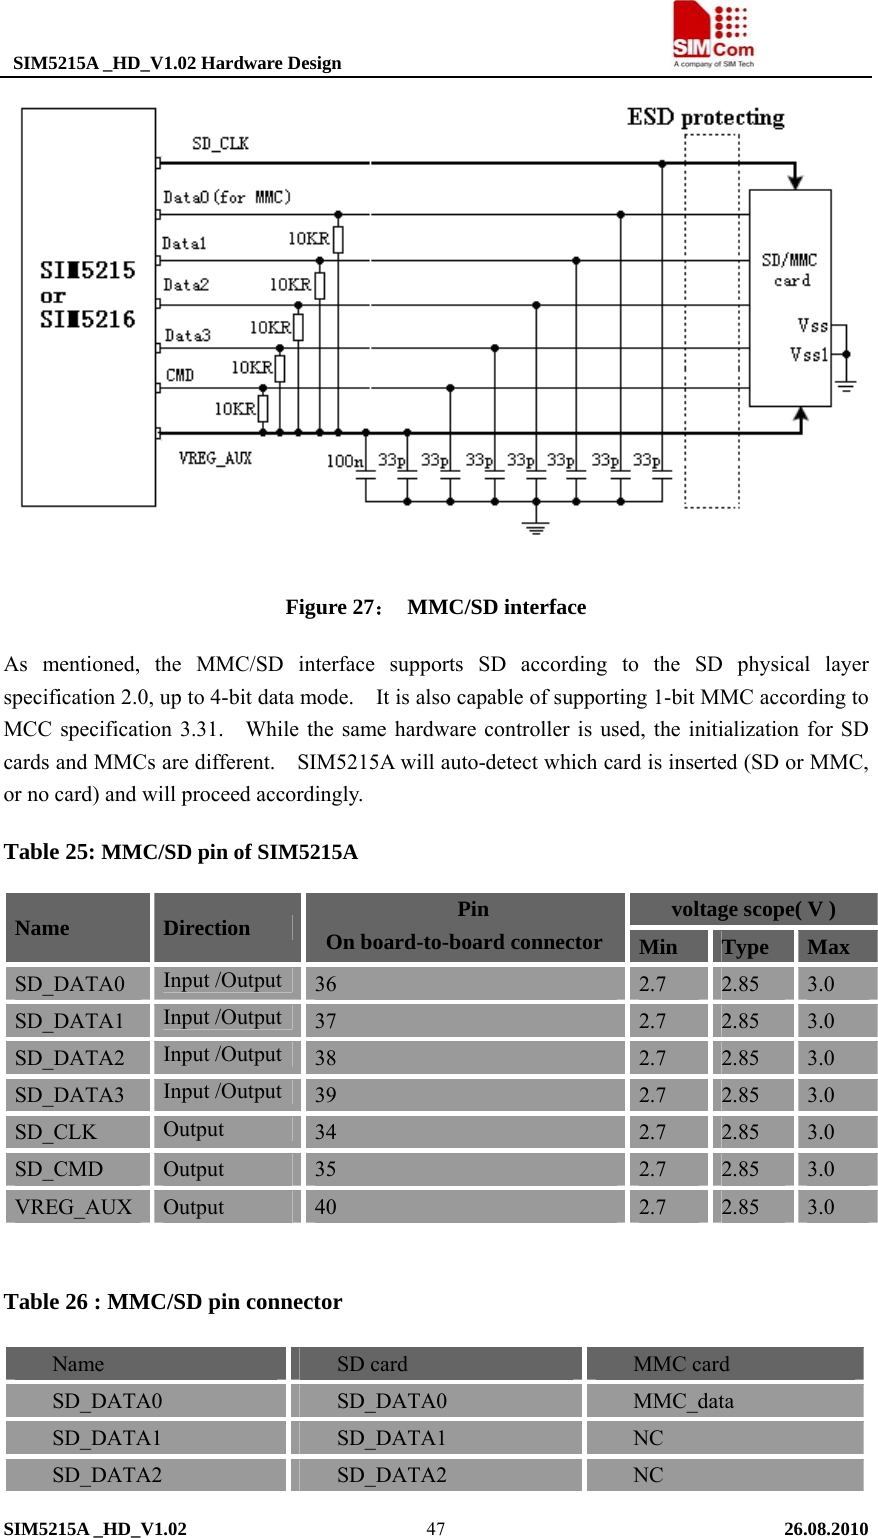  SIM5215A _HD_V1.02 Hardware Design                                     SIM5215A _HD_V1.02   26.08.2010   47 Figure 27： MMC/SD interface As mentioned, the MMC/SD interface supports SD according to the SD physical layer specification 2.0, up to 4-bit data mode.    It is also capable of supporting 1-bit MMC according to MCC specification 3.31.    While the same hardware controller is used, the initialization for SD cards and MMCs are different.    SIM5215A will auto-detect which card is inserted (SD or MMC, or no card) and will proceed accordingly.   Table 25: MMC/SD pin of SIM5215A voltage scope( V ) Name  Direction               Pin   On board-to-board connector  Min  Type  Max SD_DATA0  Input /Output  36  2.7     2.85  3.0 SD_DATA1  Input /Output  37  2.7     2.85  3.0 SD_DATA2  Input /Output  38  2.7     2.85  3.0 SD_DATA3  Input /Output  39  2.7     2.85  3.0 SD_CLK  Output  34  2.7     2.85  3.0 SD_CMD  Output  35  2.7     2.85  3.0 VREG_AUX  Output  40  2.7    2.85  3.0  Table 26 : MMC/SD pin connector Name  SD card  MMC card SD_DATA0  SD_DATA0  MMC_data SD_DATA1  SD_DATA1  NC SD_DATA2  SD_DATA2  NC 